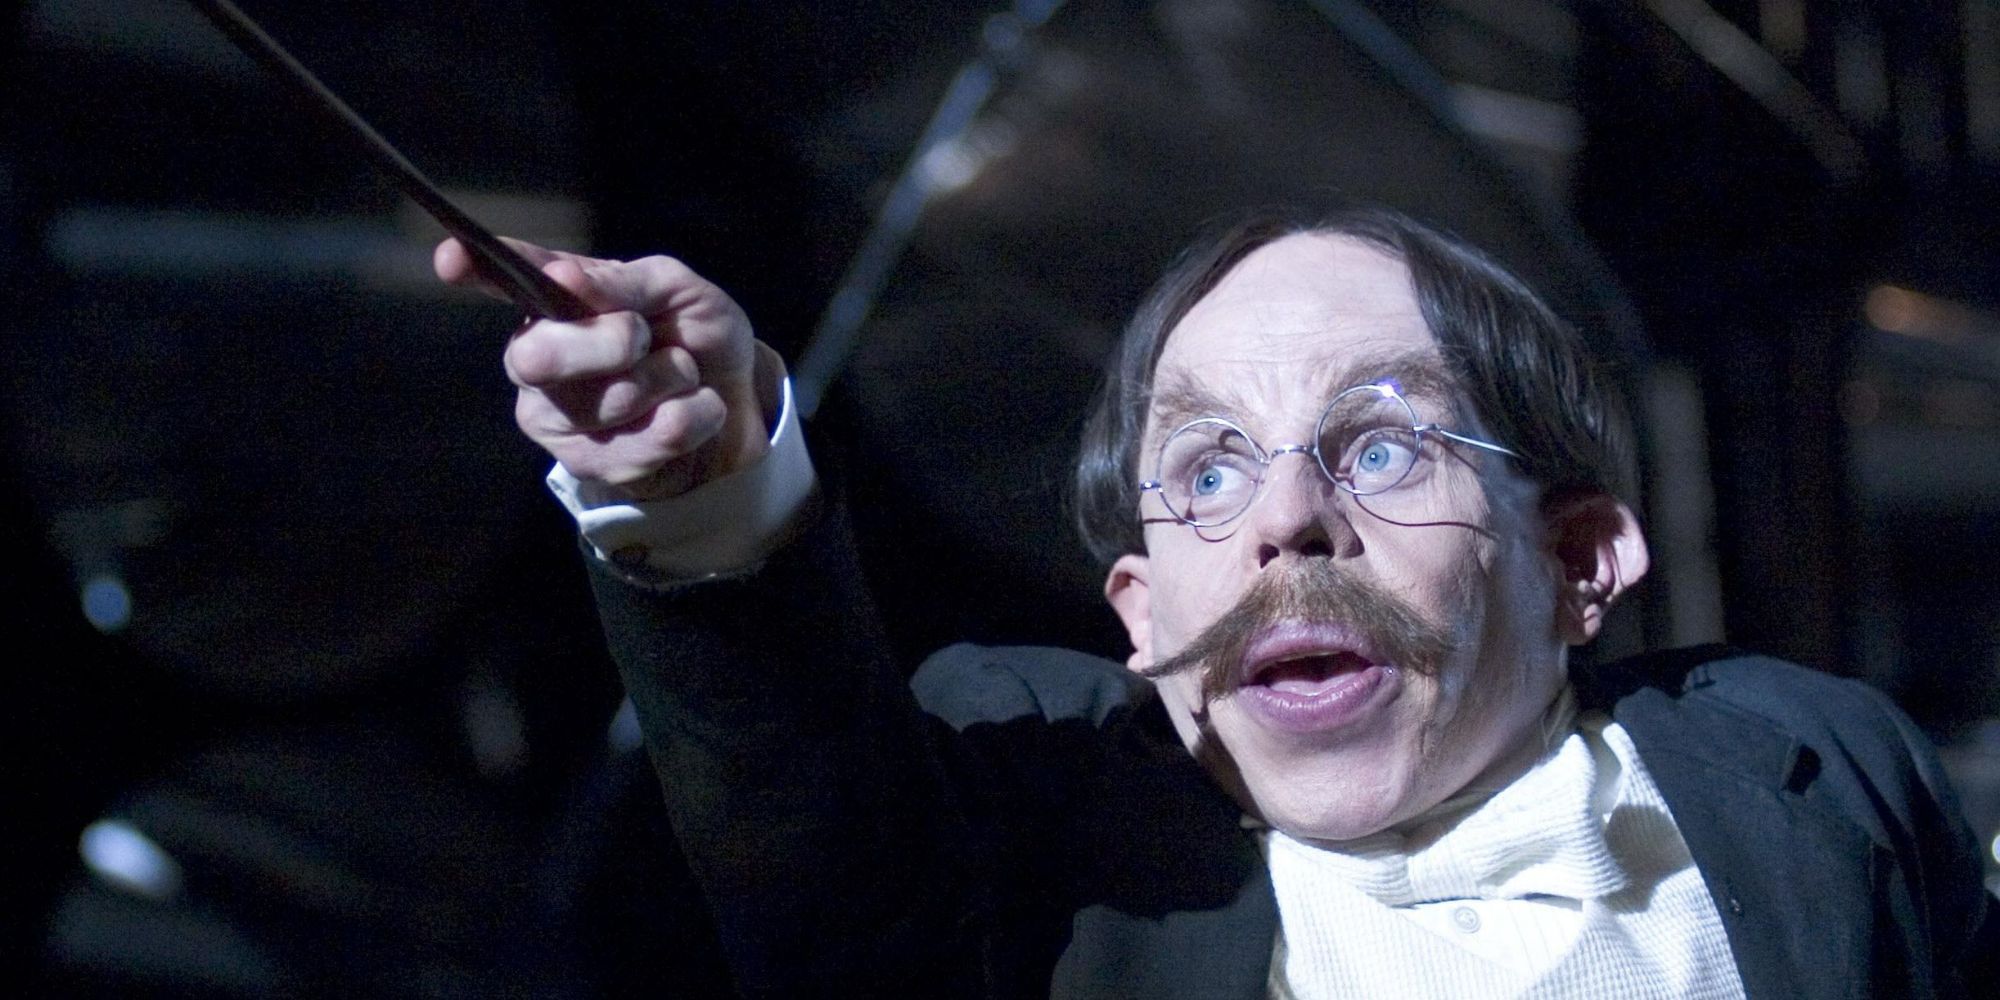 Flitwick pointing his wand at something